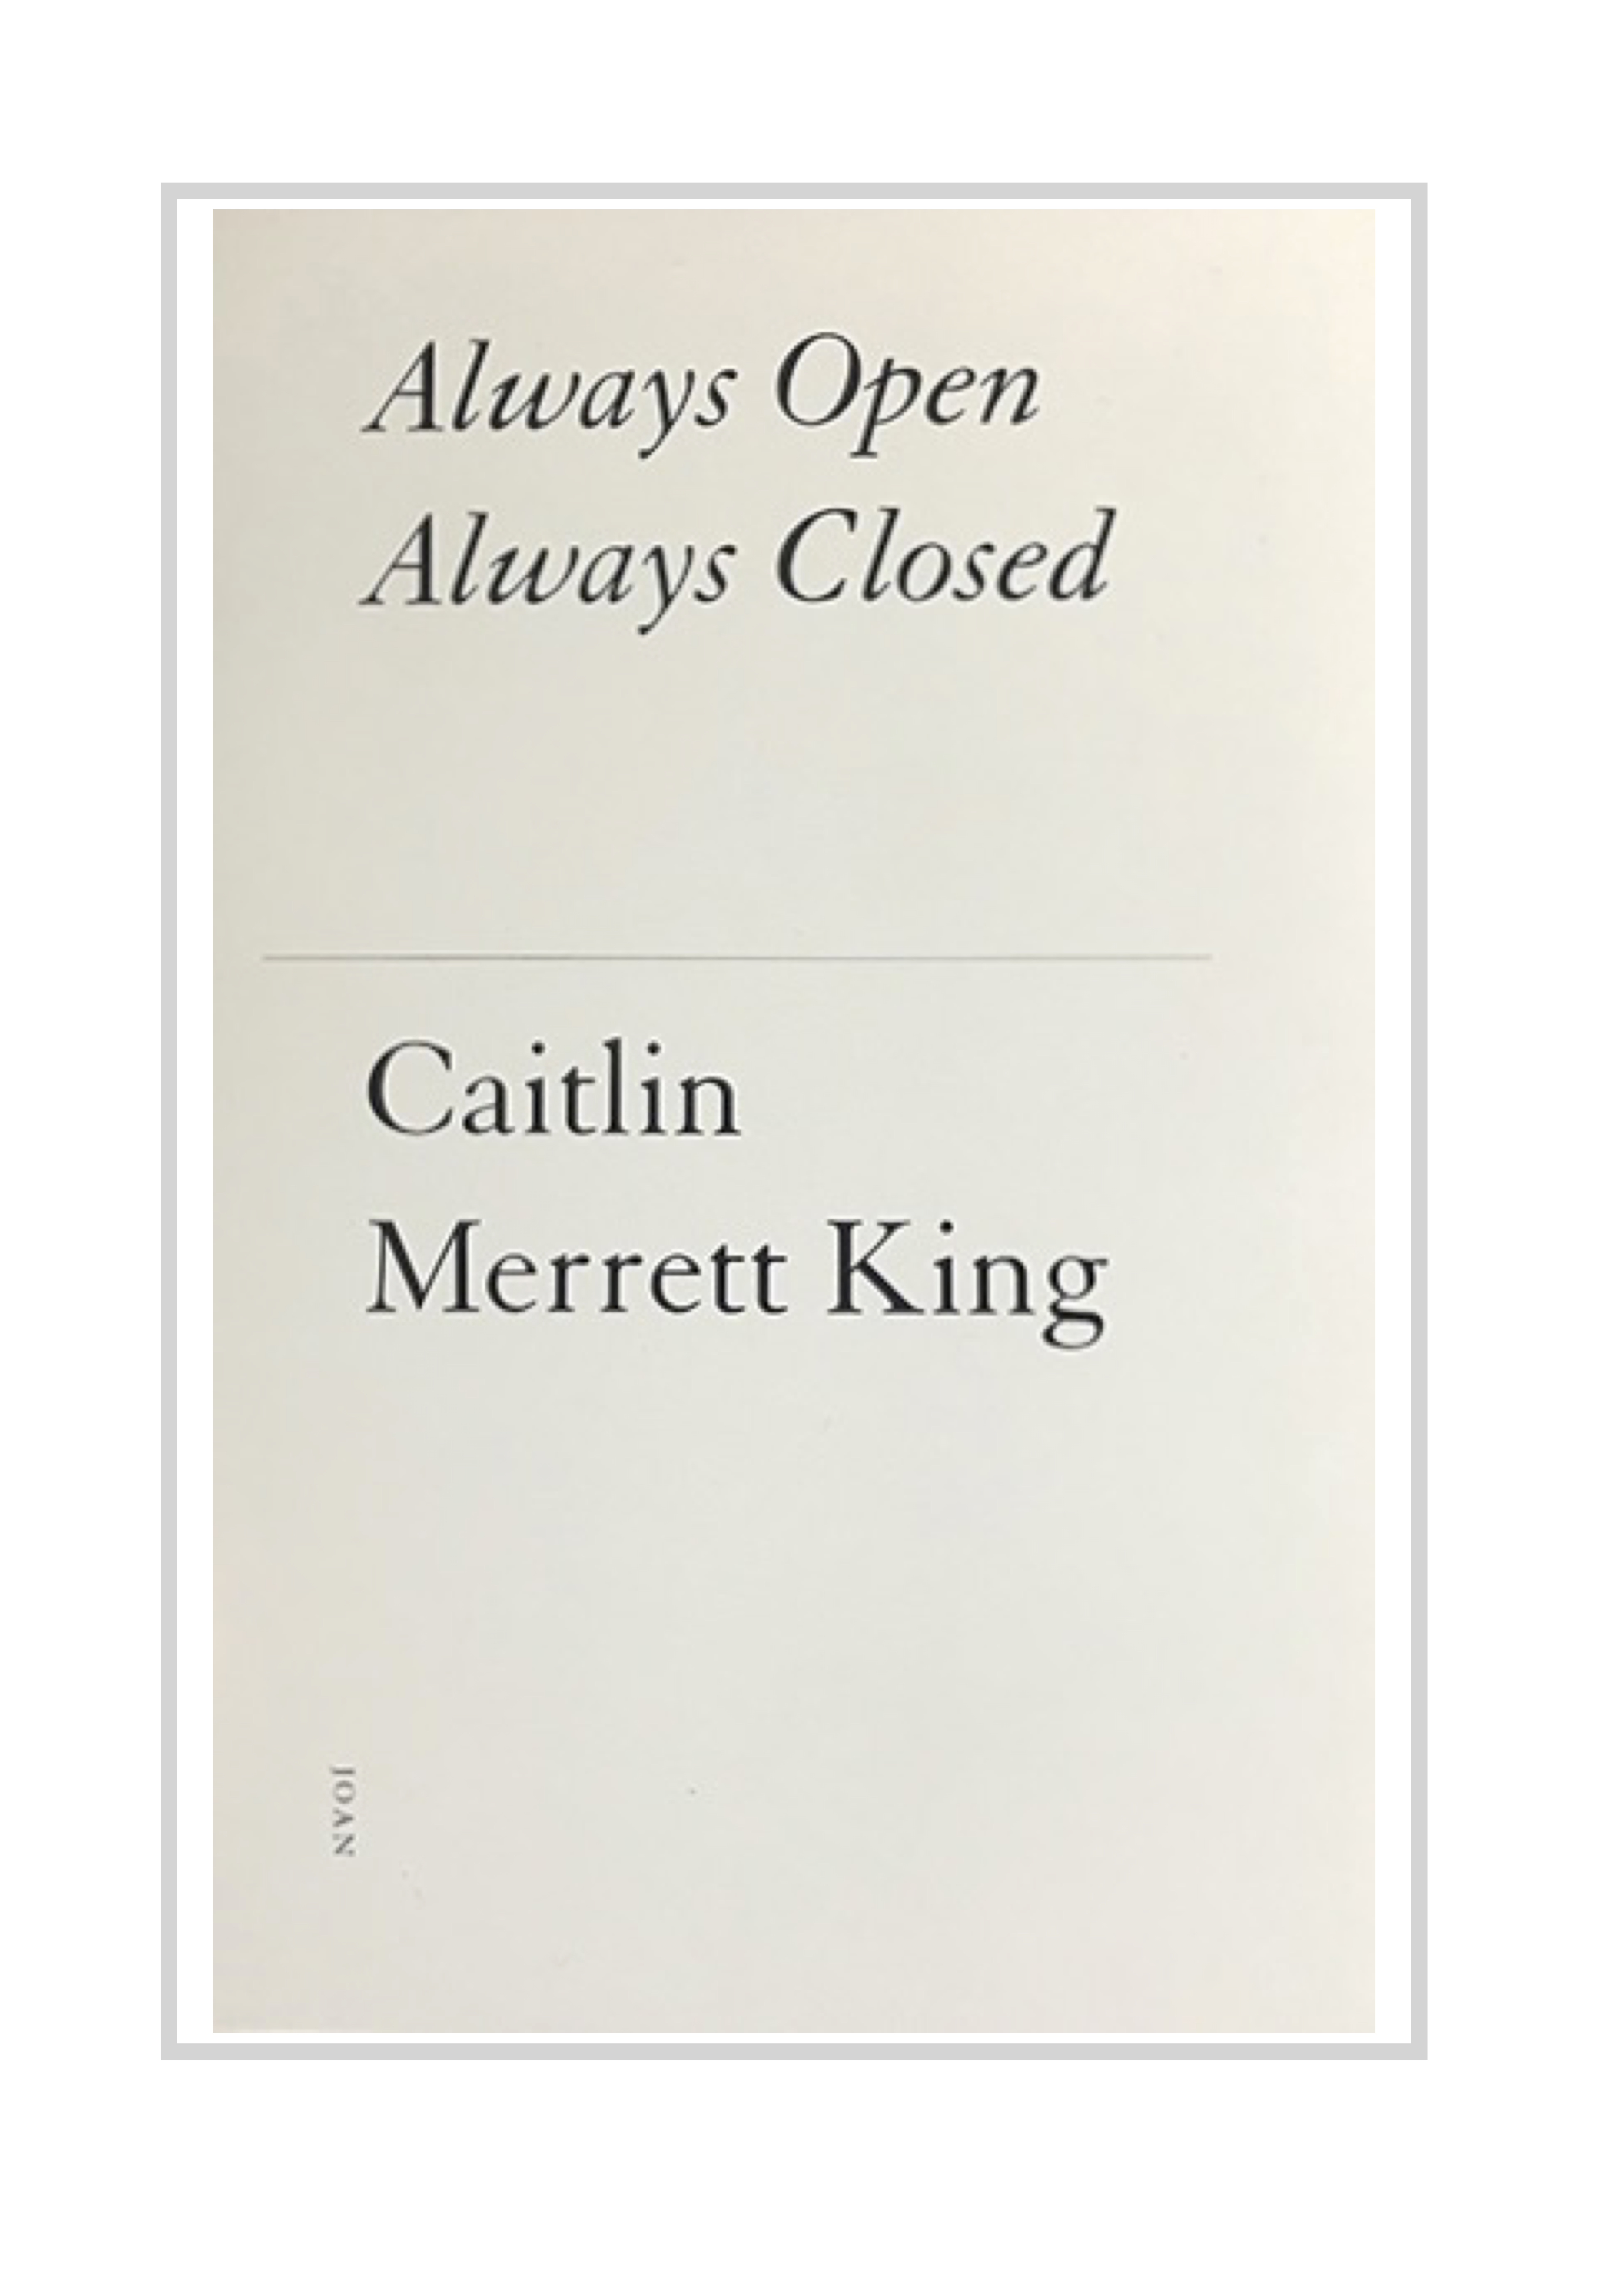 QUITE BEAUTIFULLY NOT: Always Open Always Closed by Caitlin Merrett King